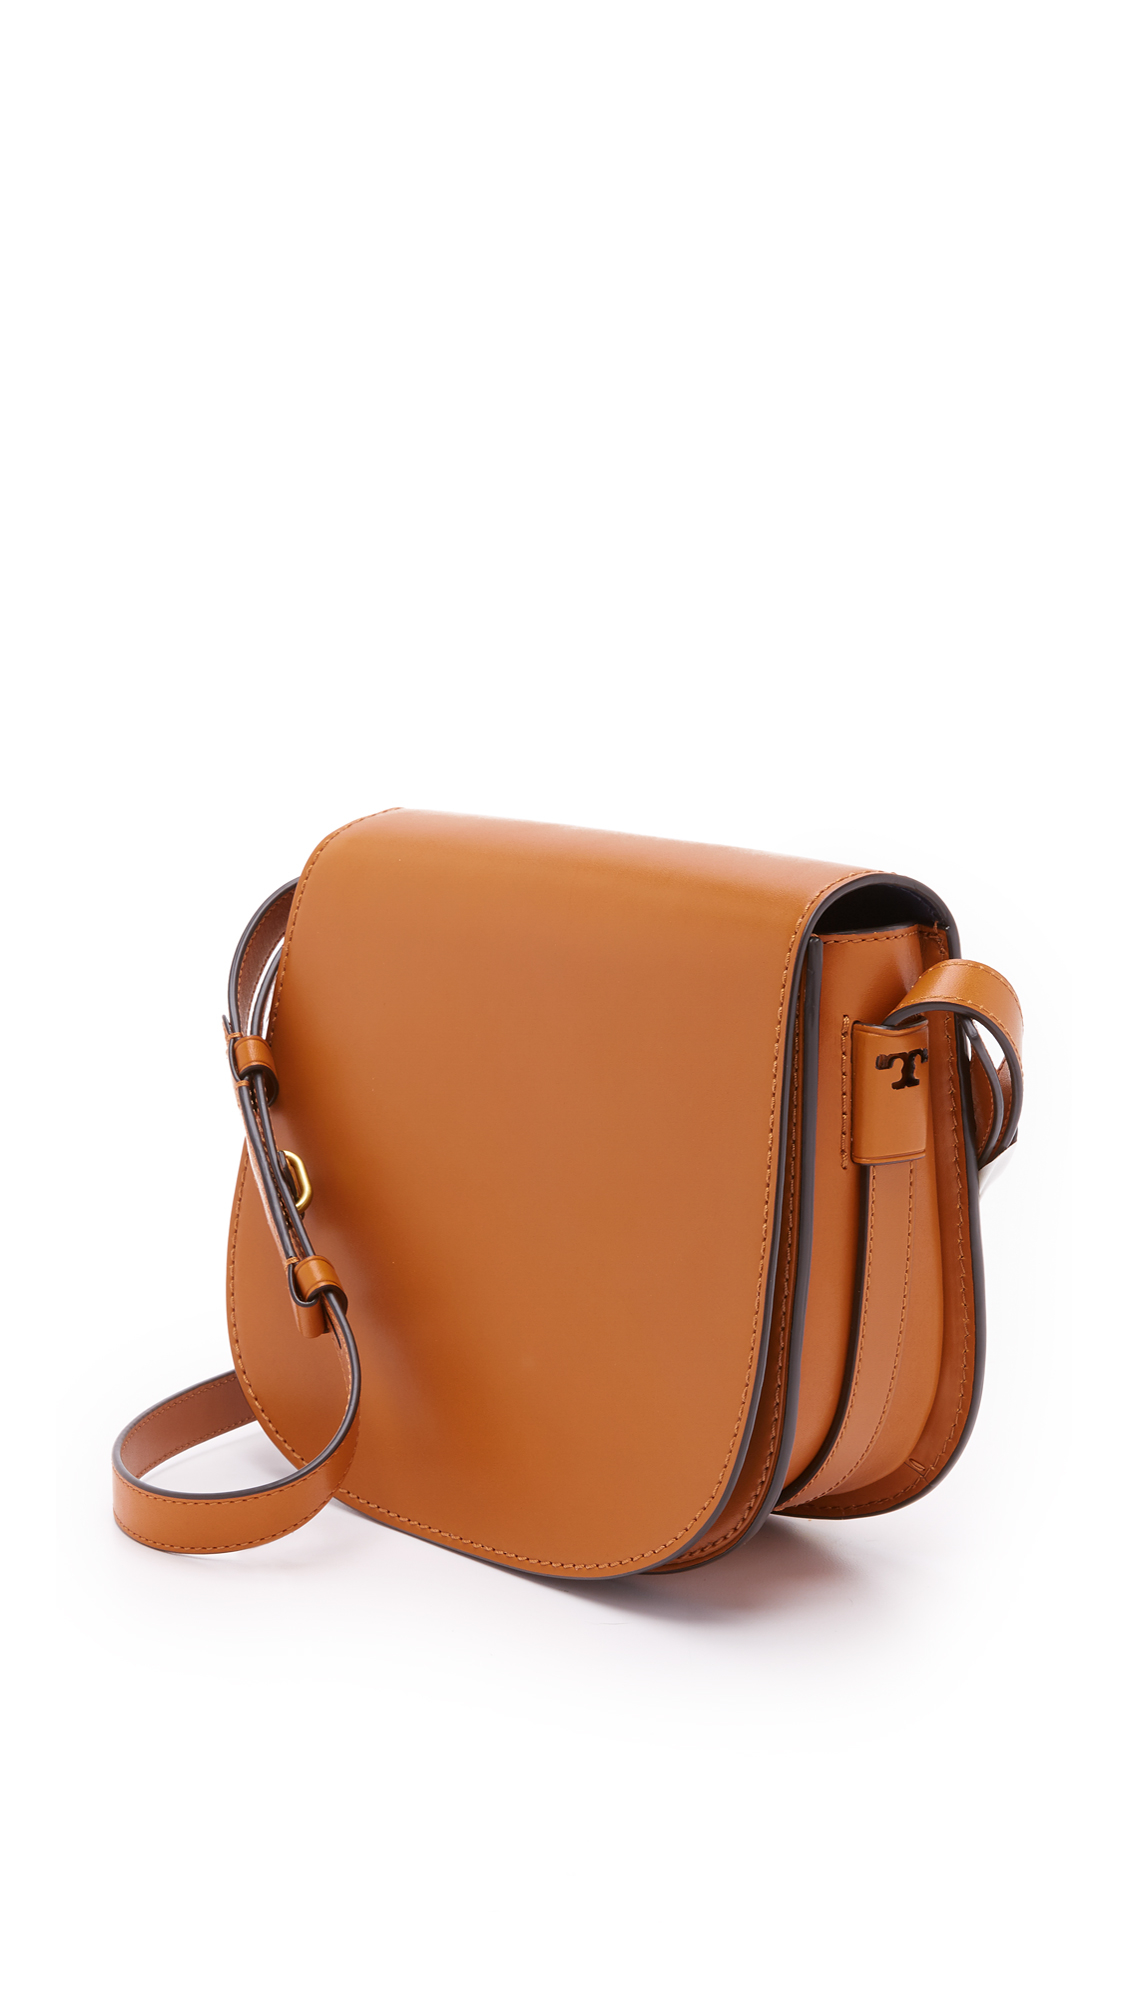 Lyst - Tory Burch Leather Saddle Bag in Brown